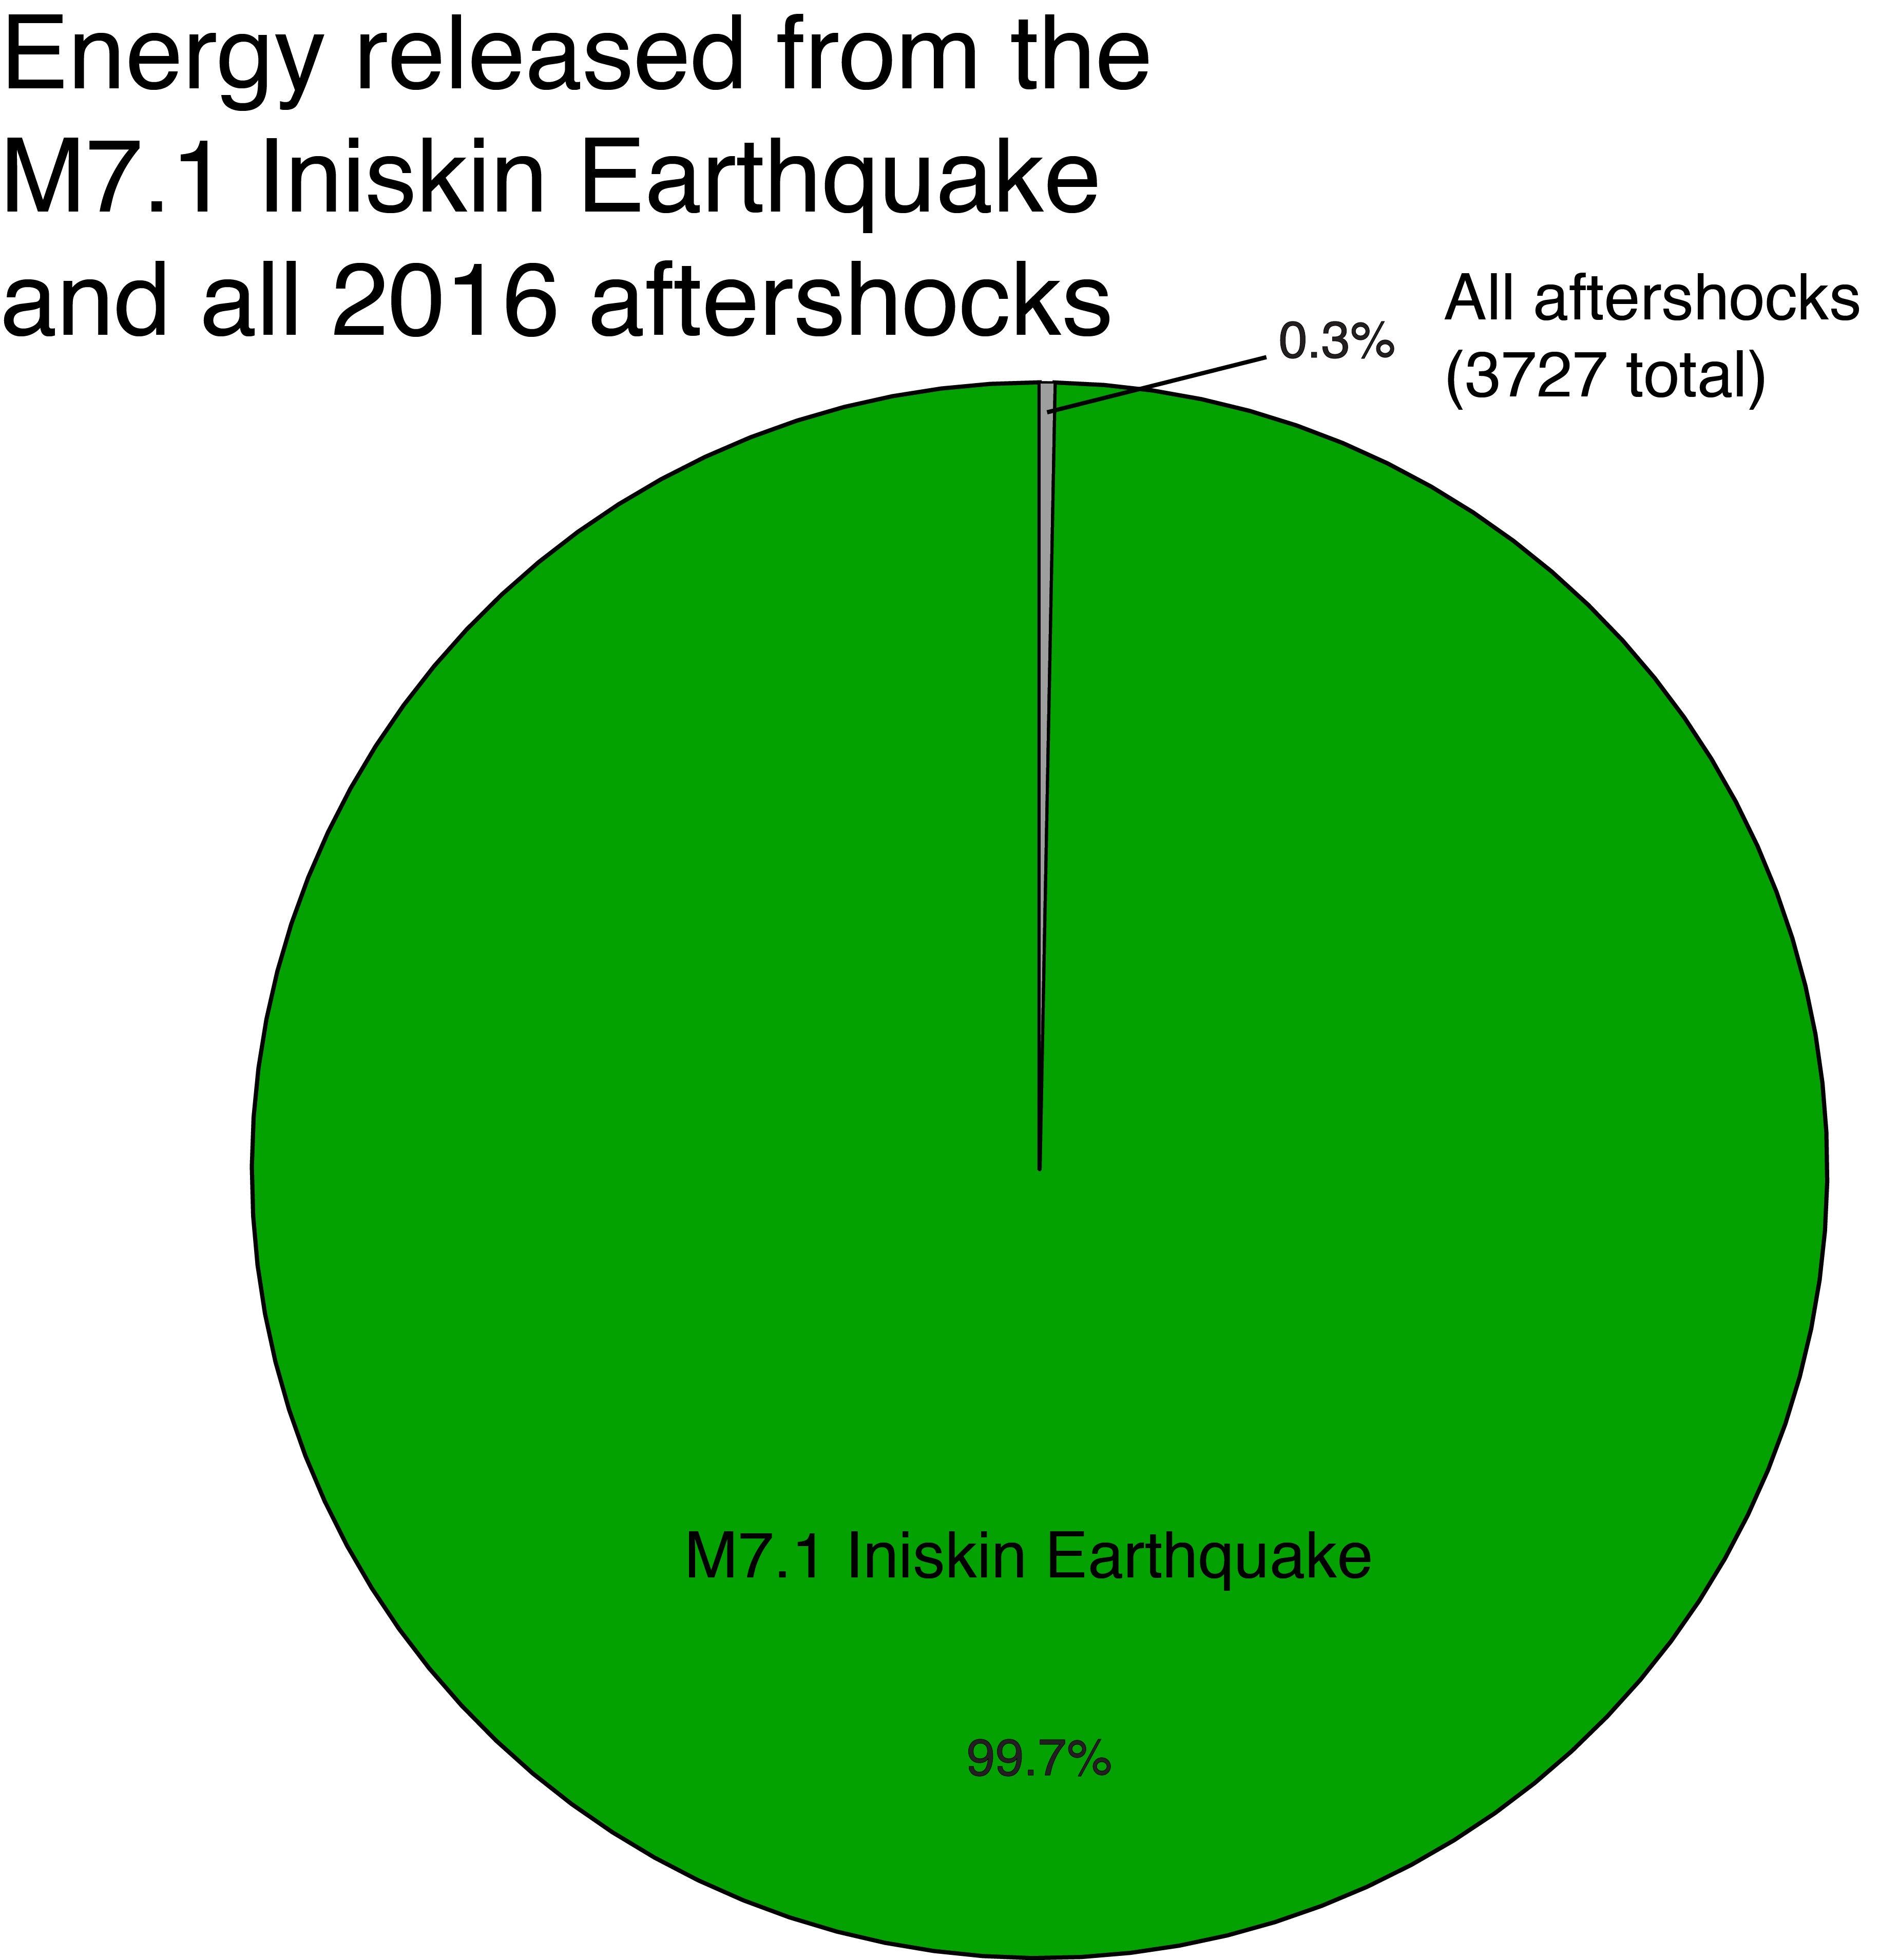 The M7.1 mainshock dominates the sequence, with all of the recorded aftershocks together accounting for less than 1% of the total energy released.